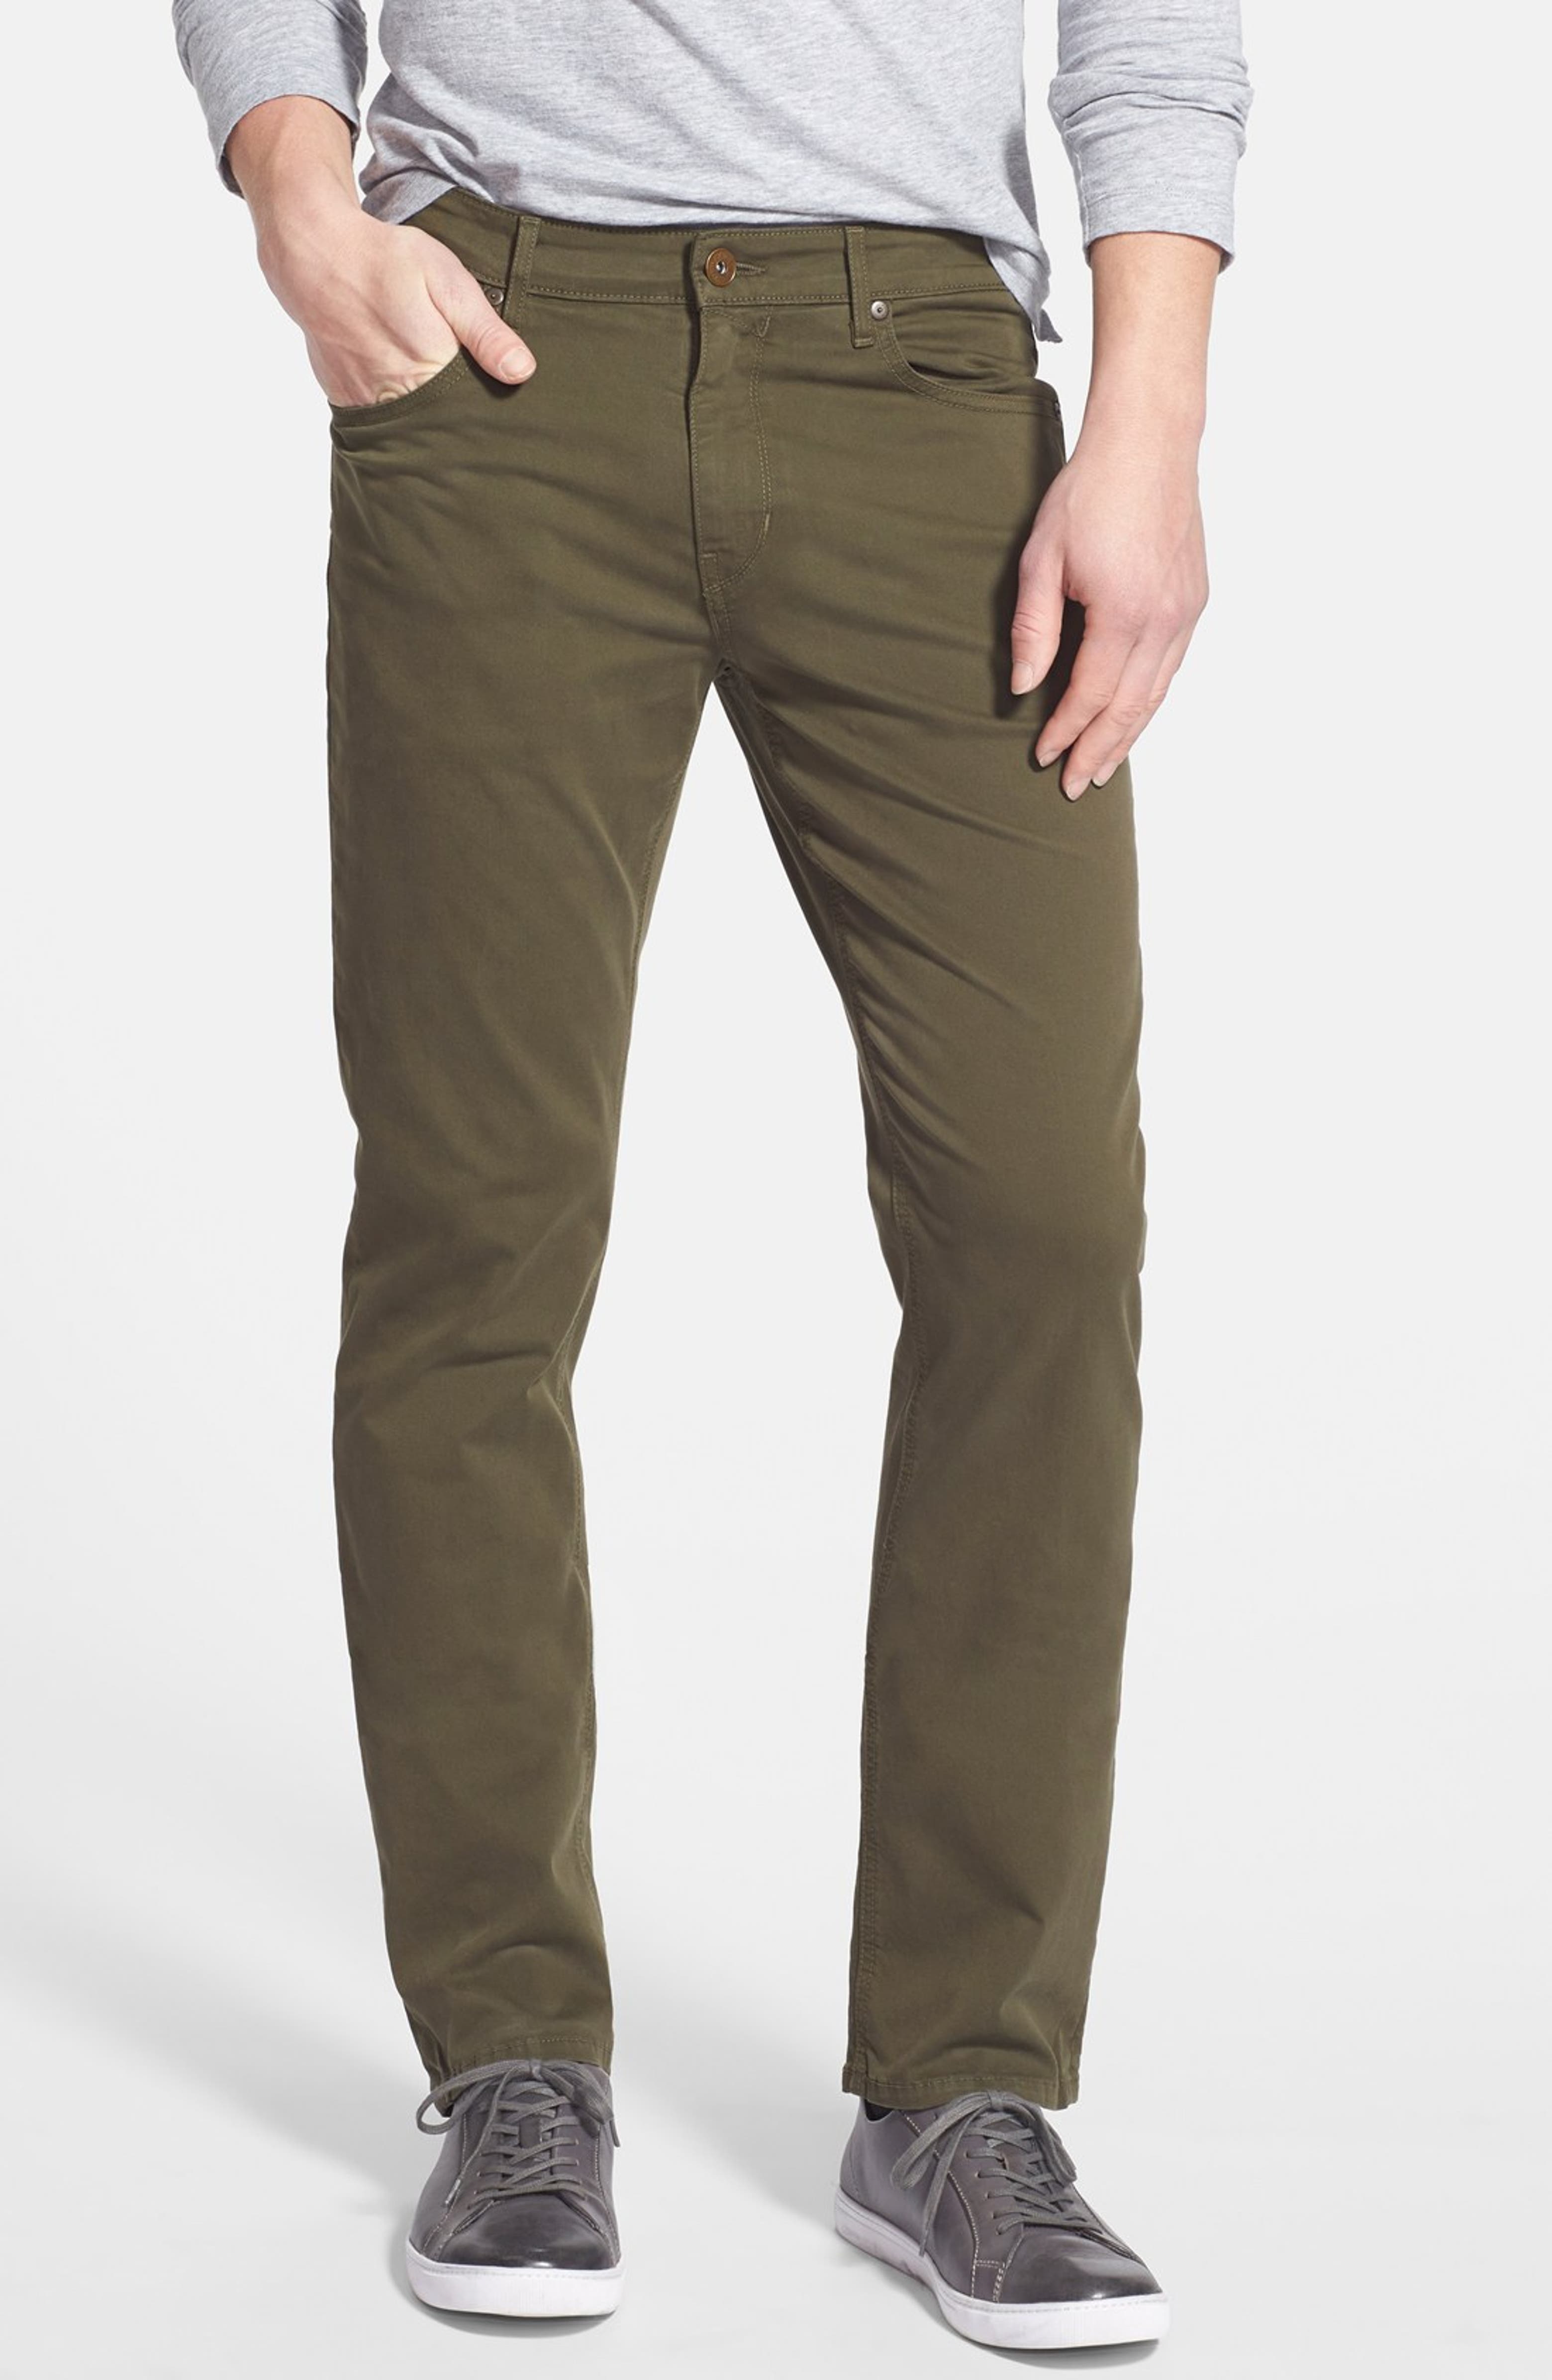 PAIGE 'Normandie' Straight Leg Jeans (Loden Green) | Nordstrom